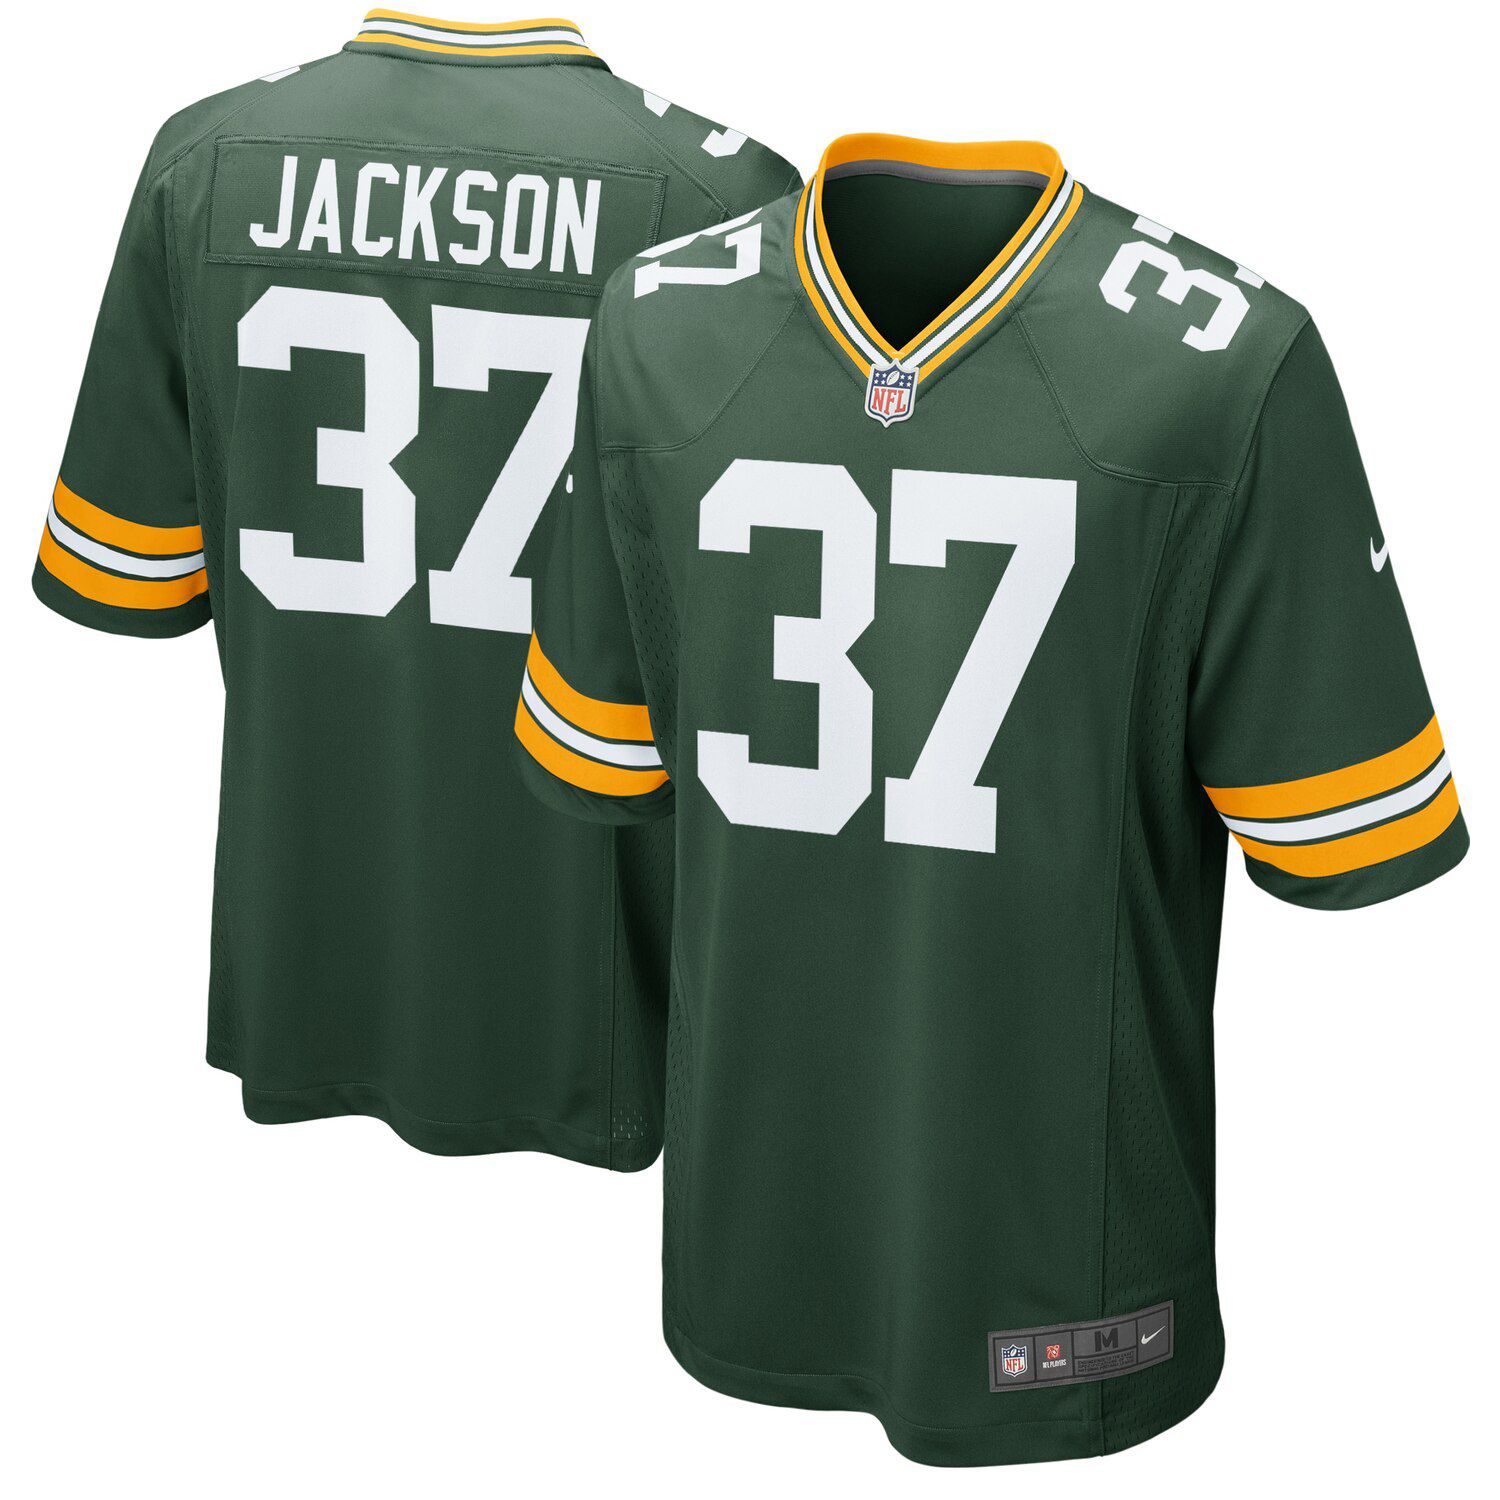 green bay packers black jersey